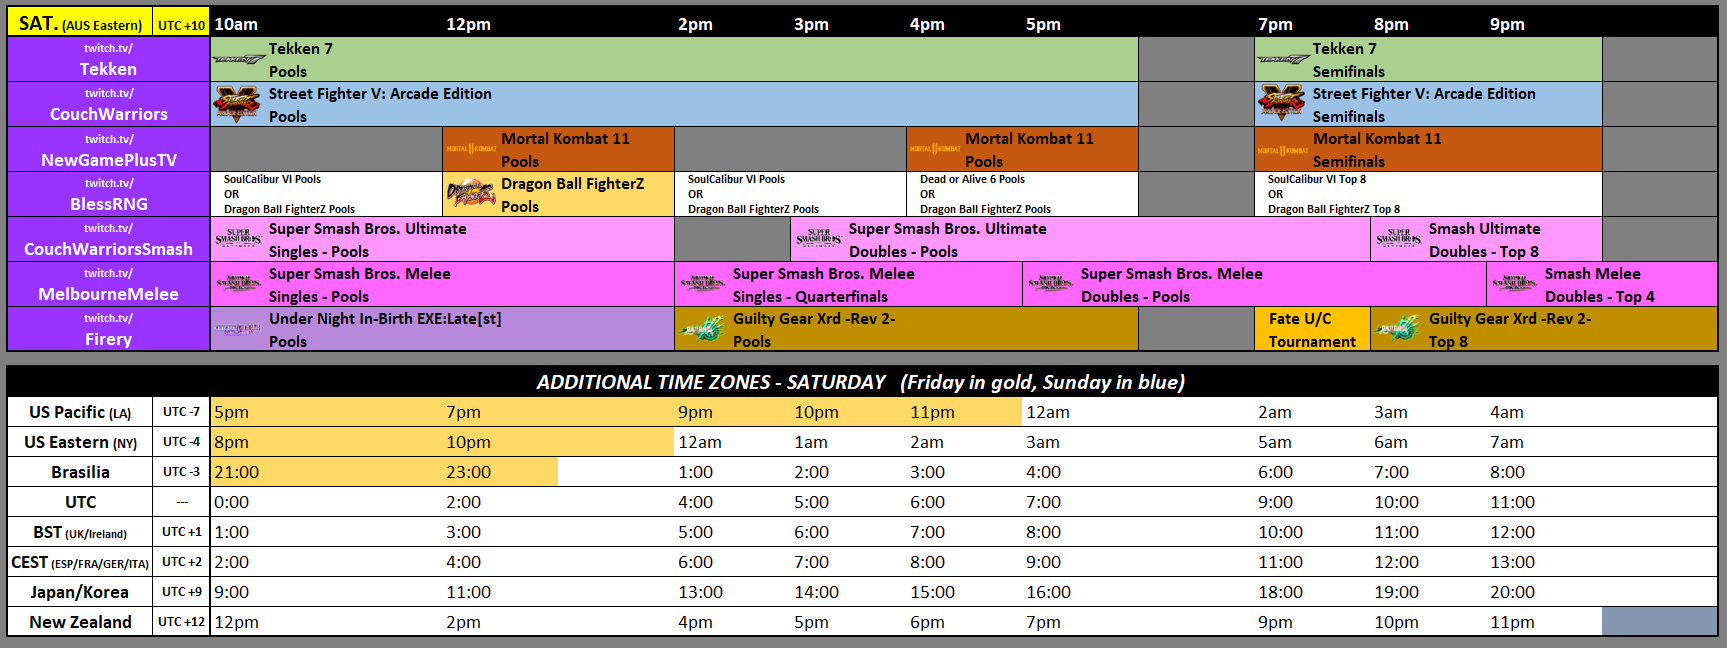 BAM11 schedule.png